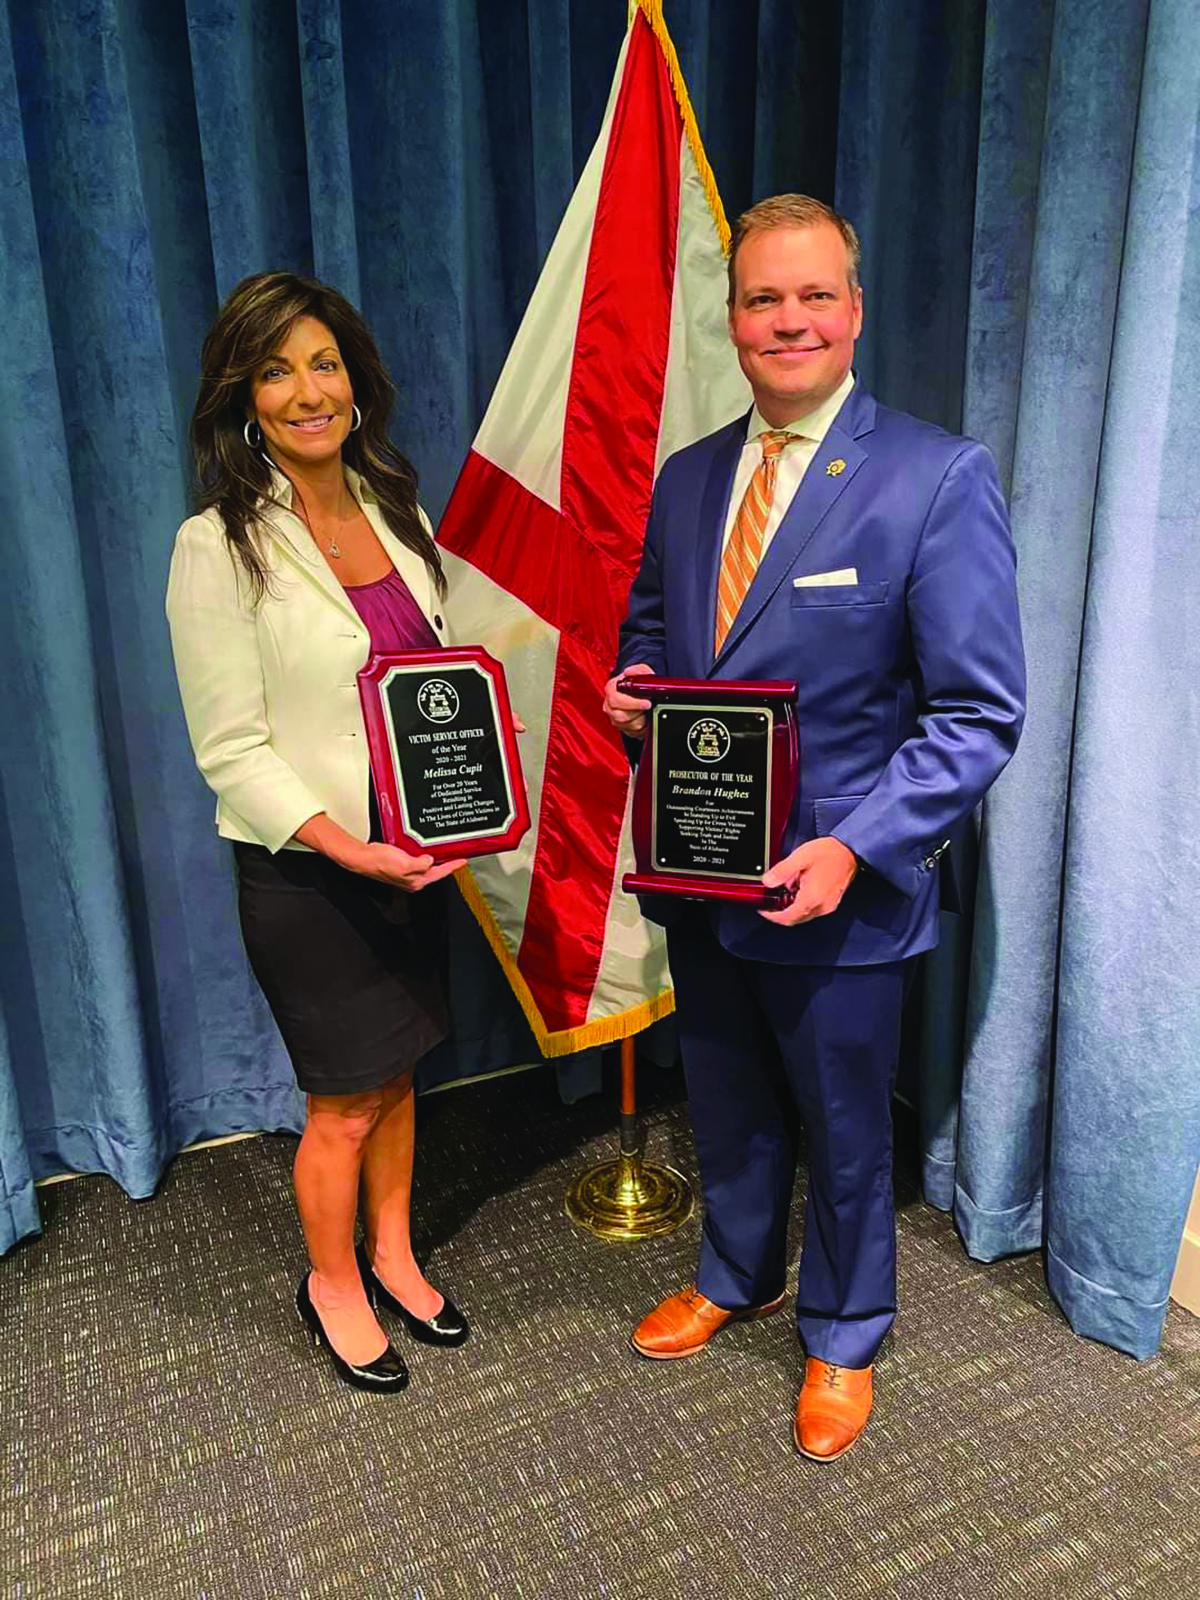 Lee County’s DA Brandon Hughes named Alabama Prosecutor of the Year; Melissa Cupit named Alabama Victim Service Officer of the year